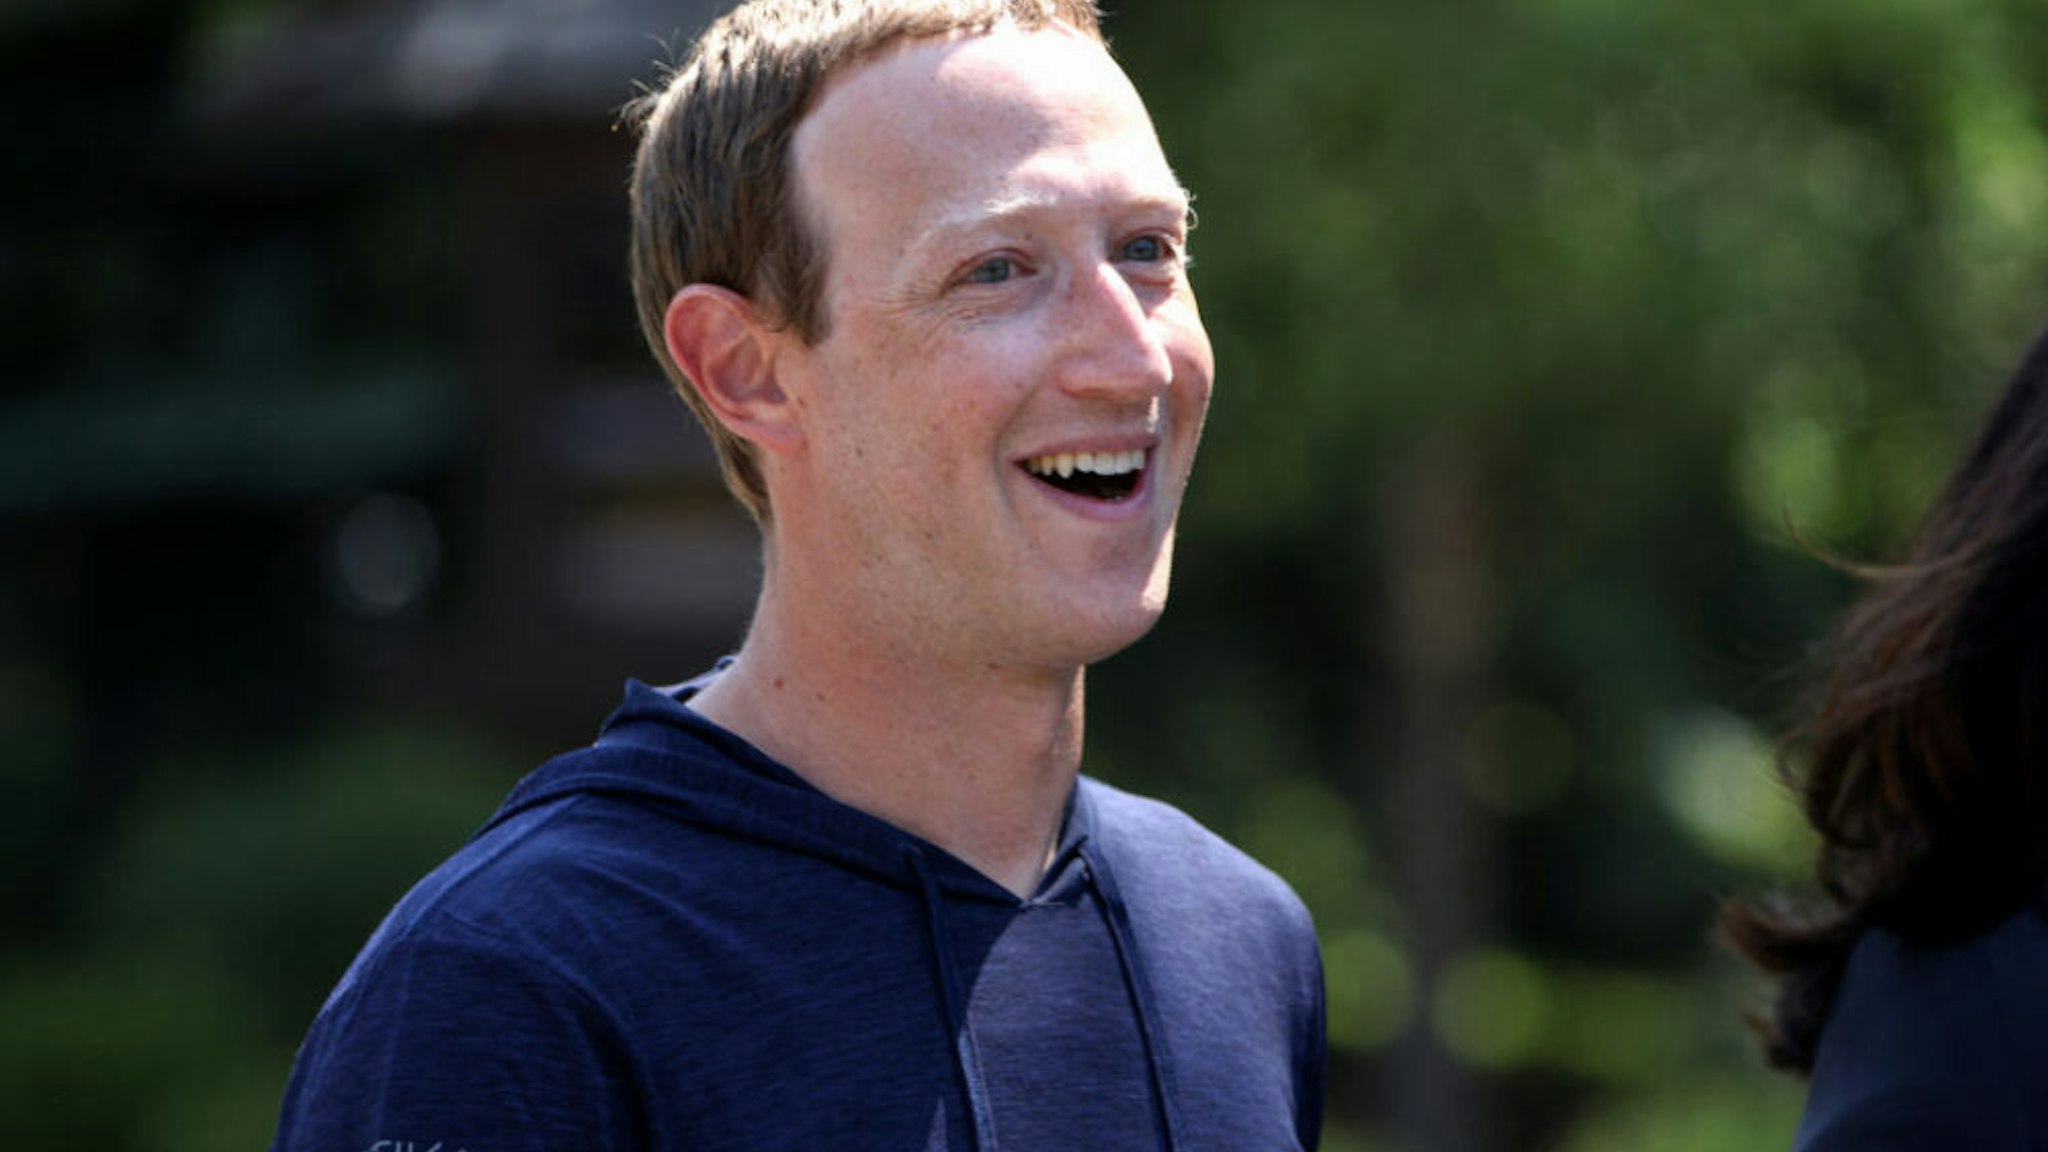 SUN VALLEY, IDAHO - JULY 08: CEO of Facebook Mark Zuckerberg walks to lunch following a session at the Allen &amp; Company Sun Valley Conference on July 08, 2021 in Sun Valley, Idaho. After a year hiatus due to the COVID-19 pandemic, the world’s most wealthy and powerful businesspeople from the media, finance, and technology worlds will converge at the Sun Valley Resort for the exclusive week-long conference.